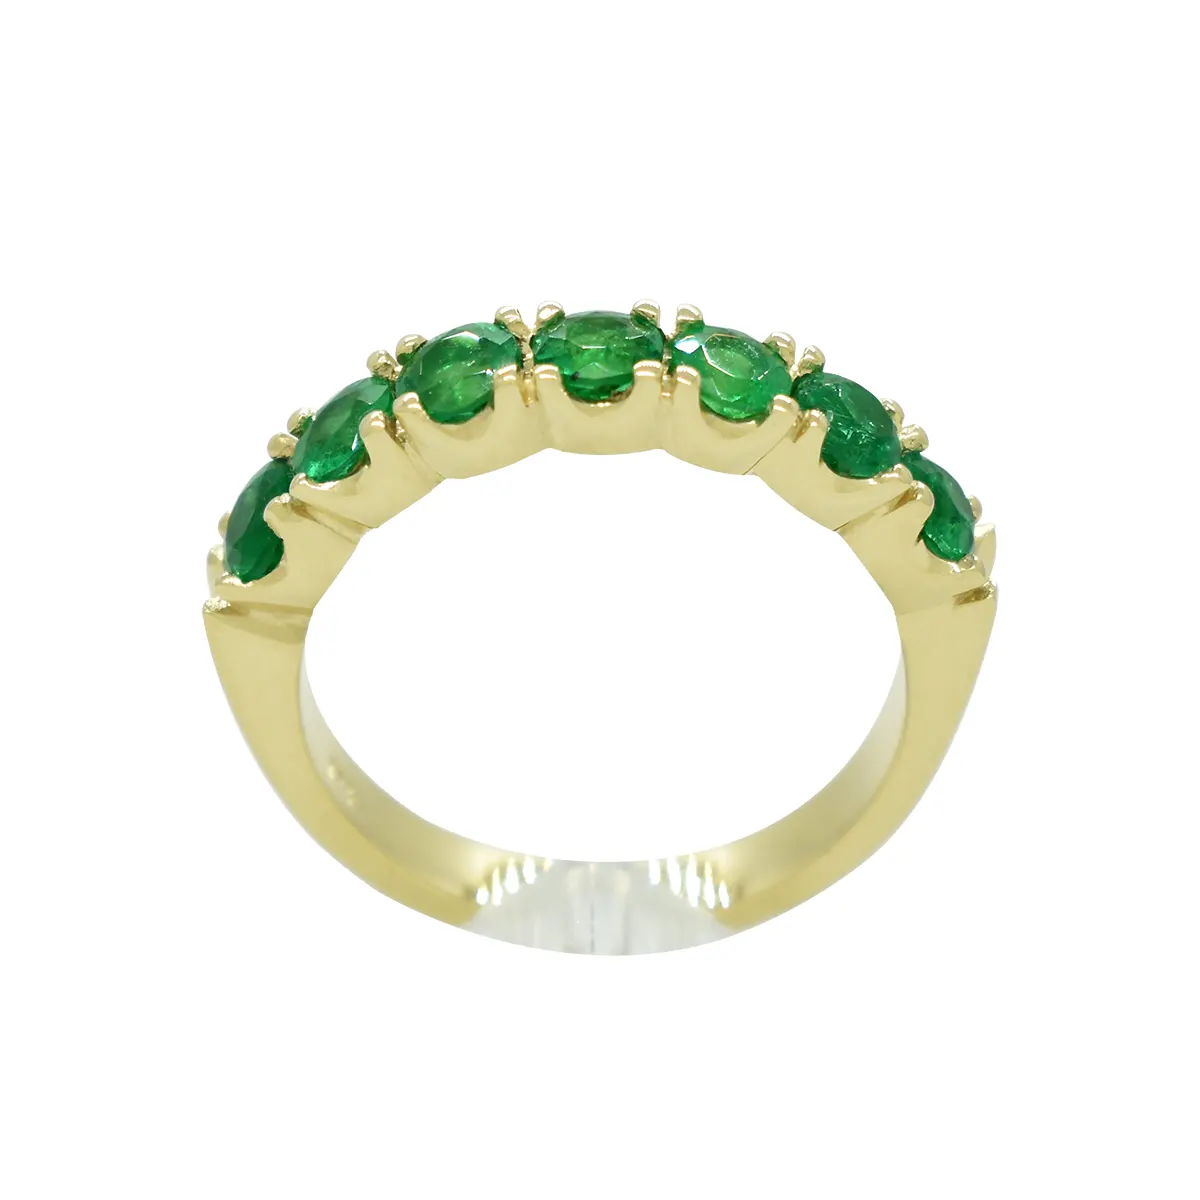 Half eternity emerald wedding band ring. The smooth gold sides create a smooth, comfortable feeling between the fingers and a better fit than complete eternity bands